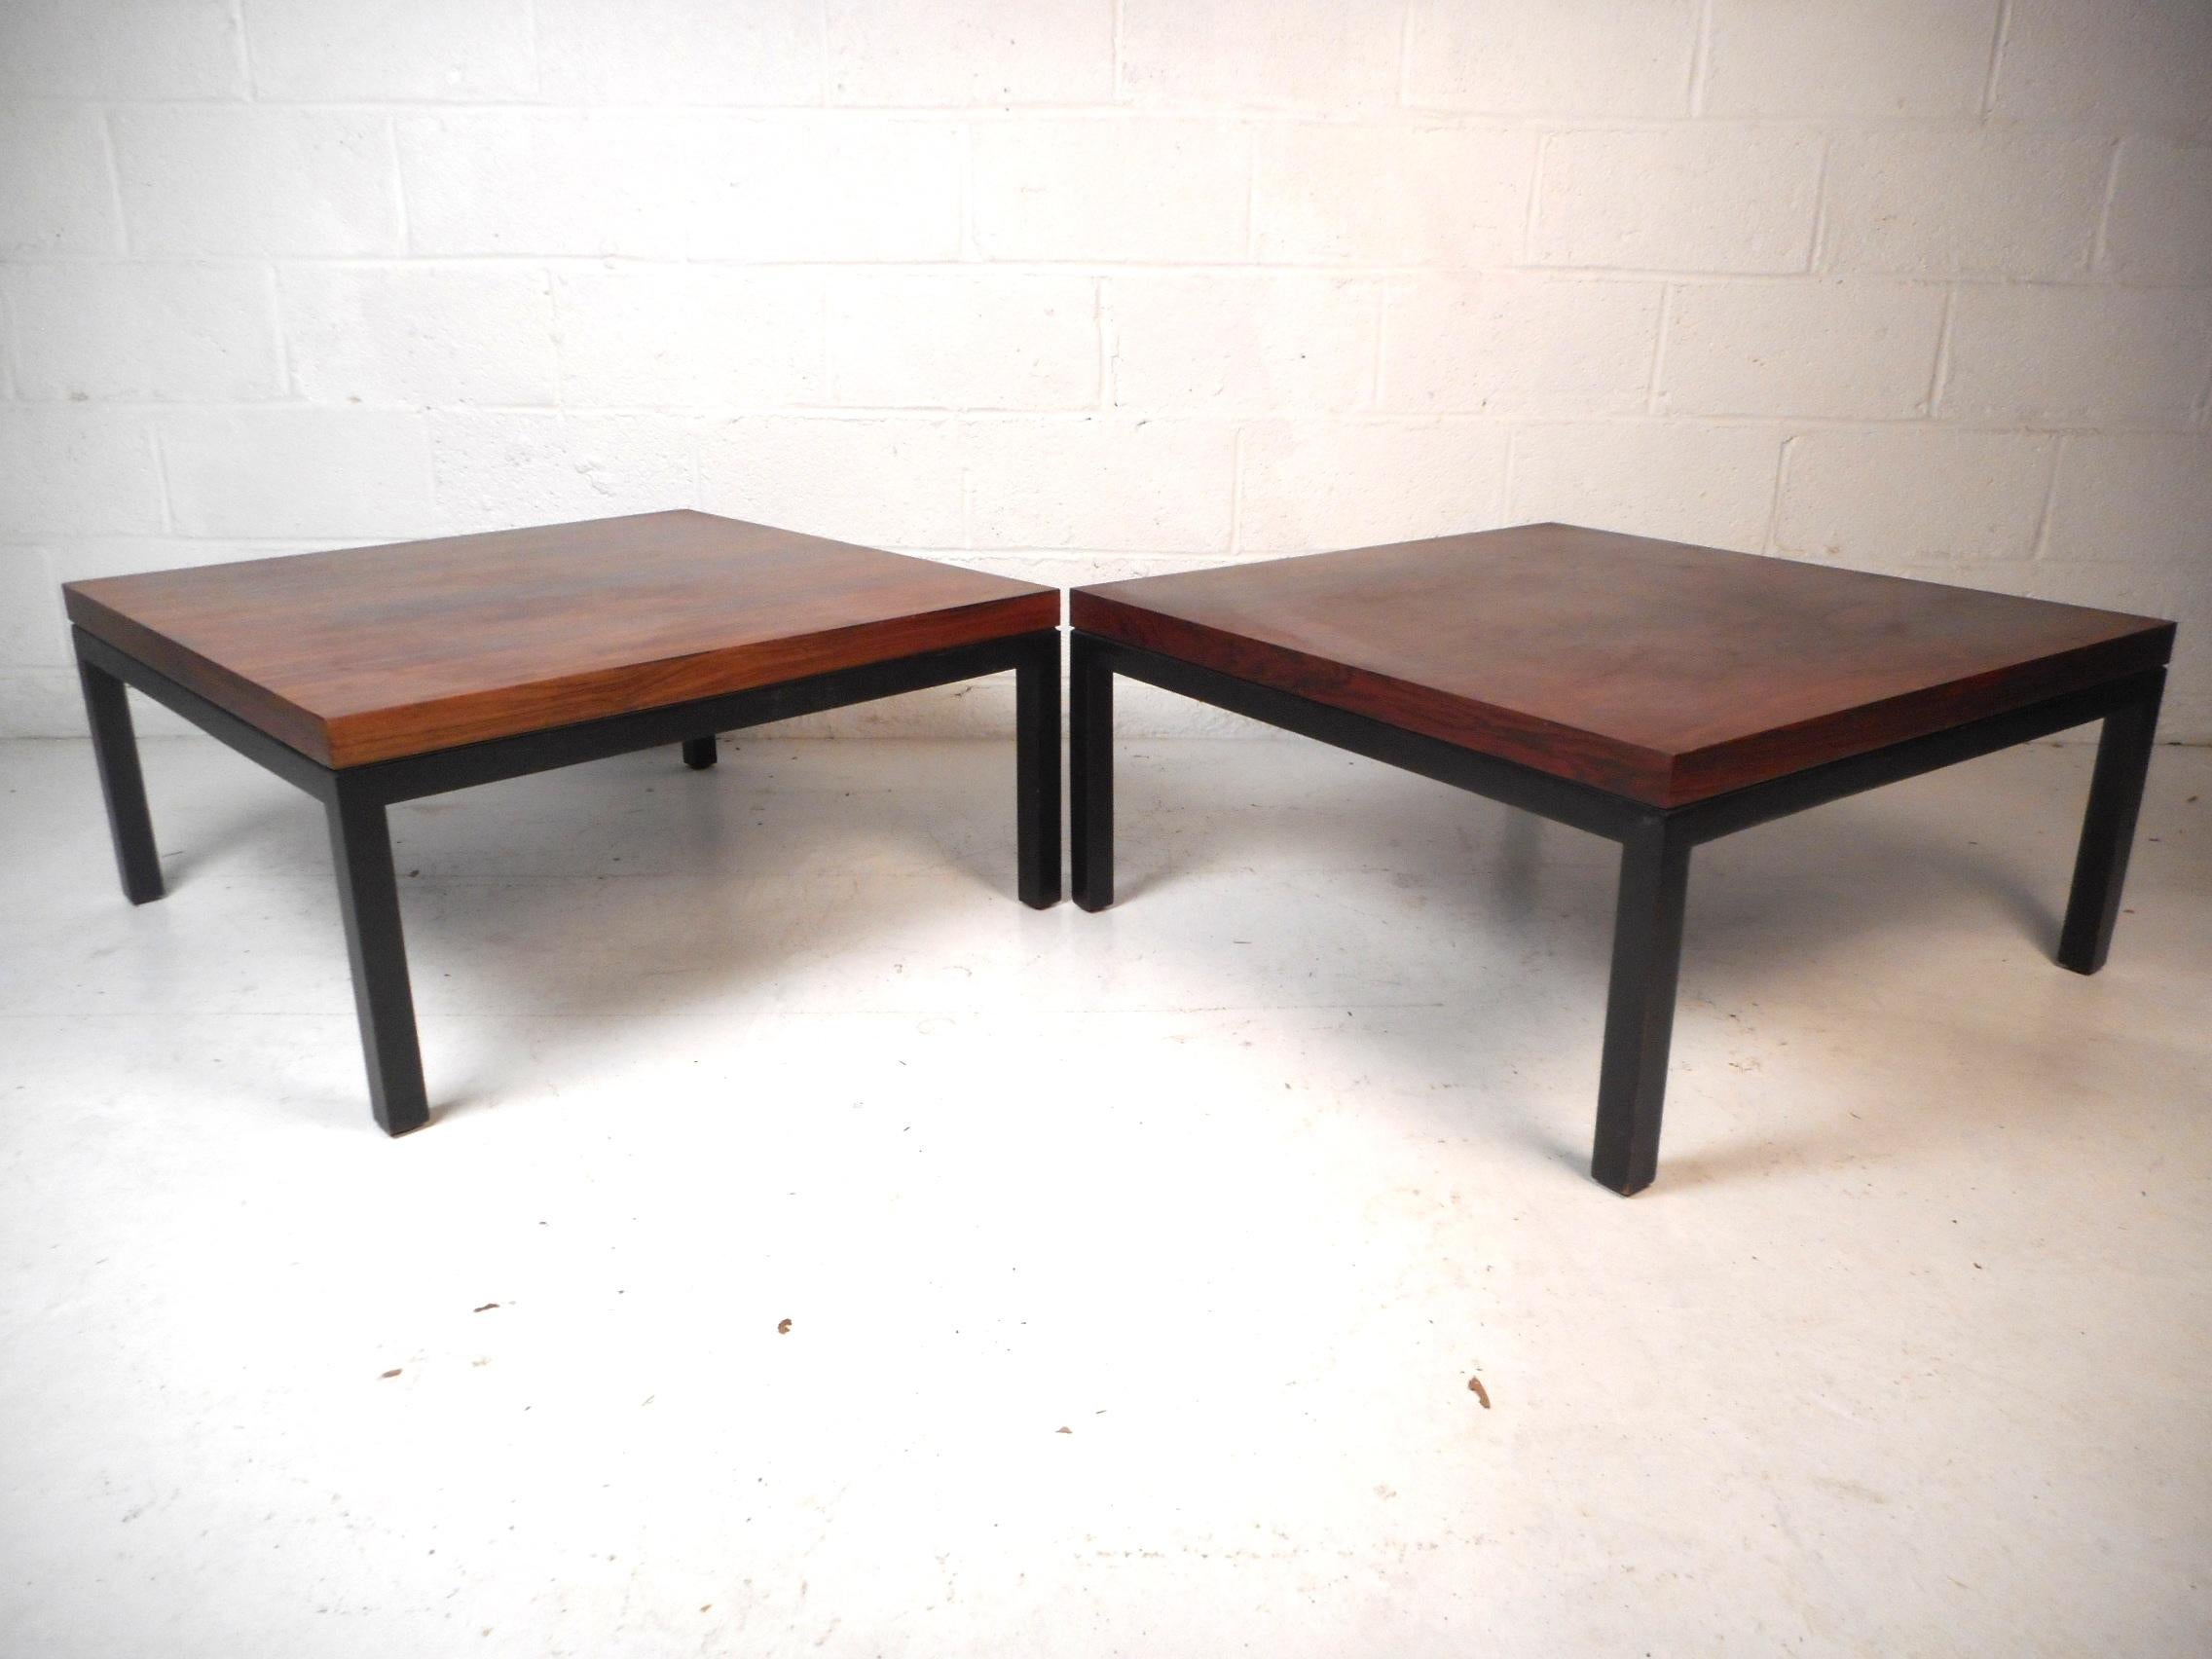 American Pair of Midcentury Rosewood Coffee Tables by Milo Baughman for Thayer Coggin